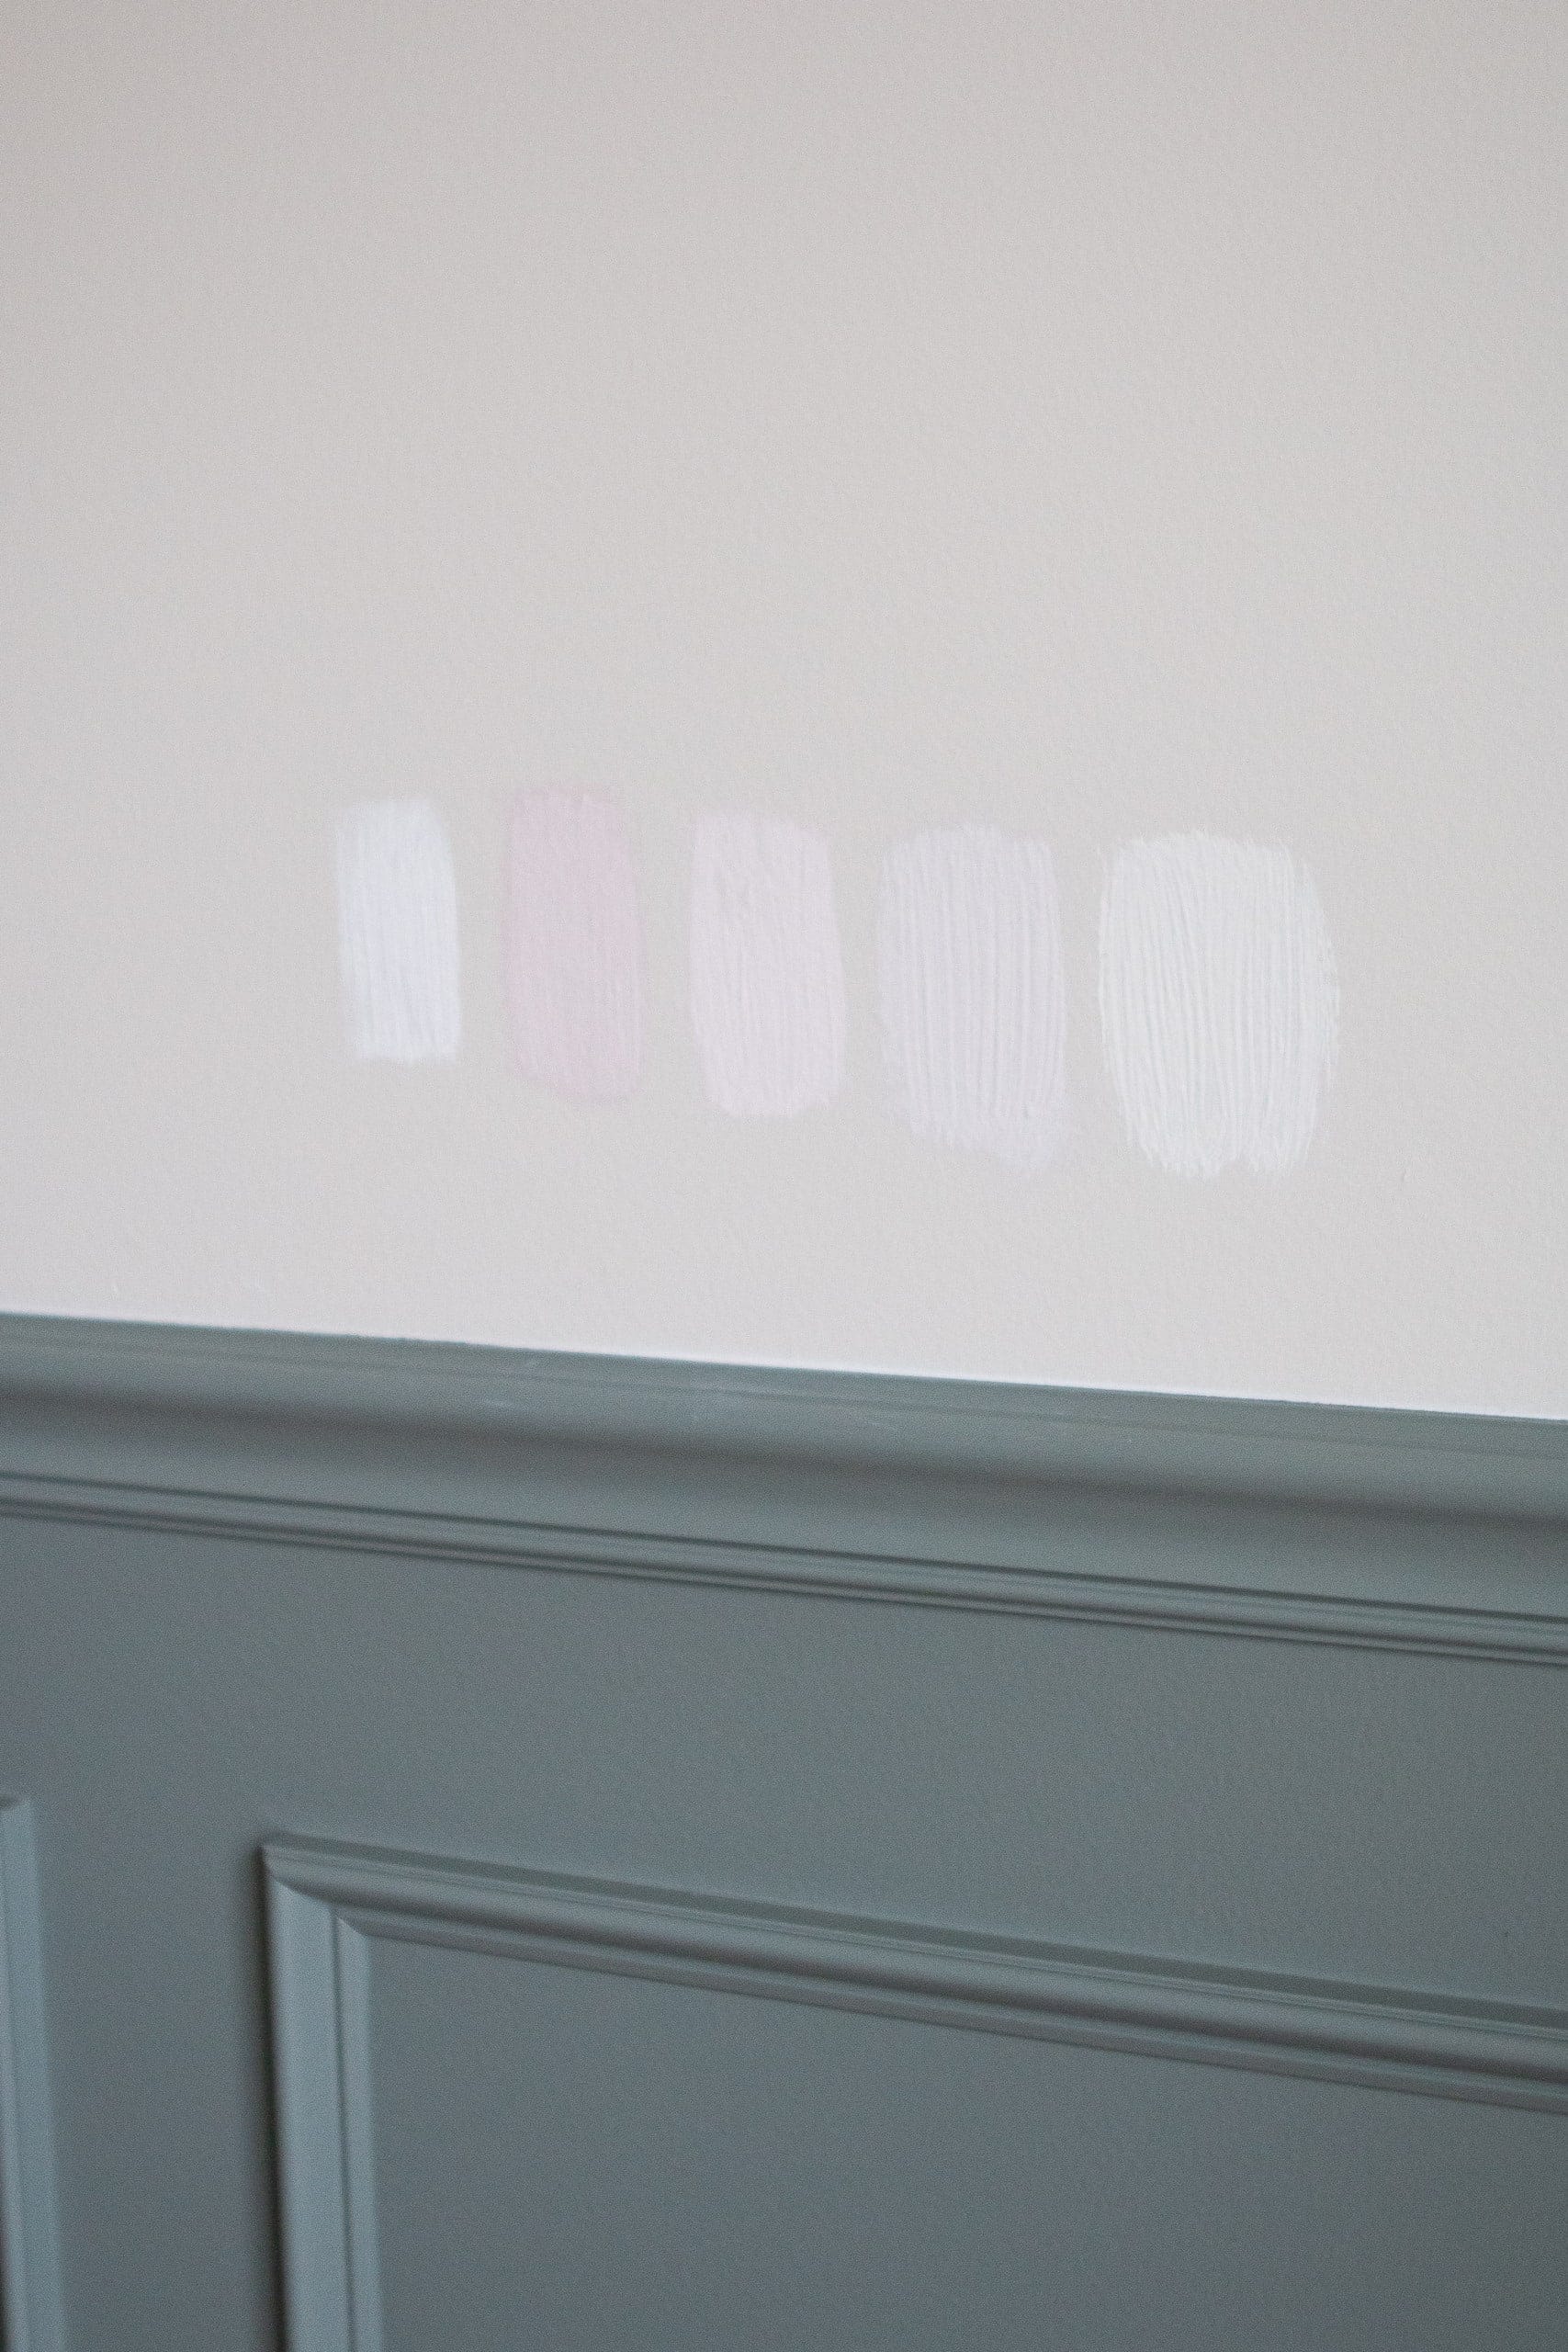 Choosing paint colors for our nursery